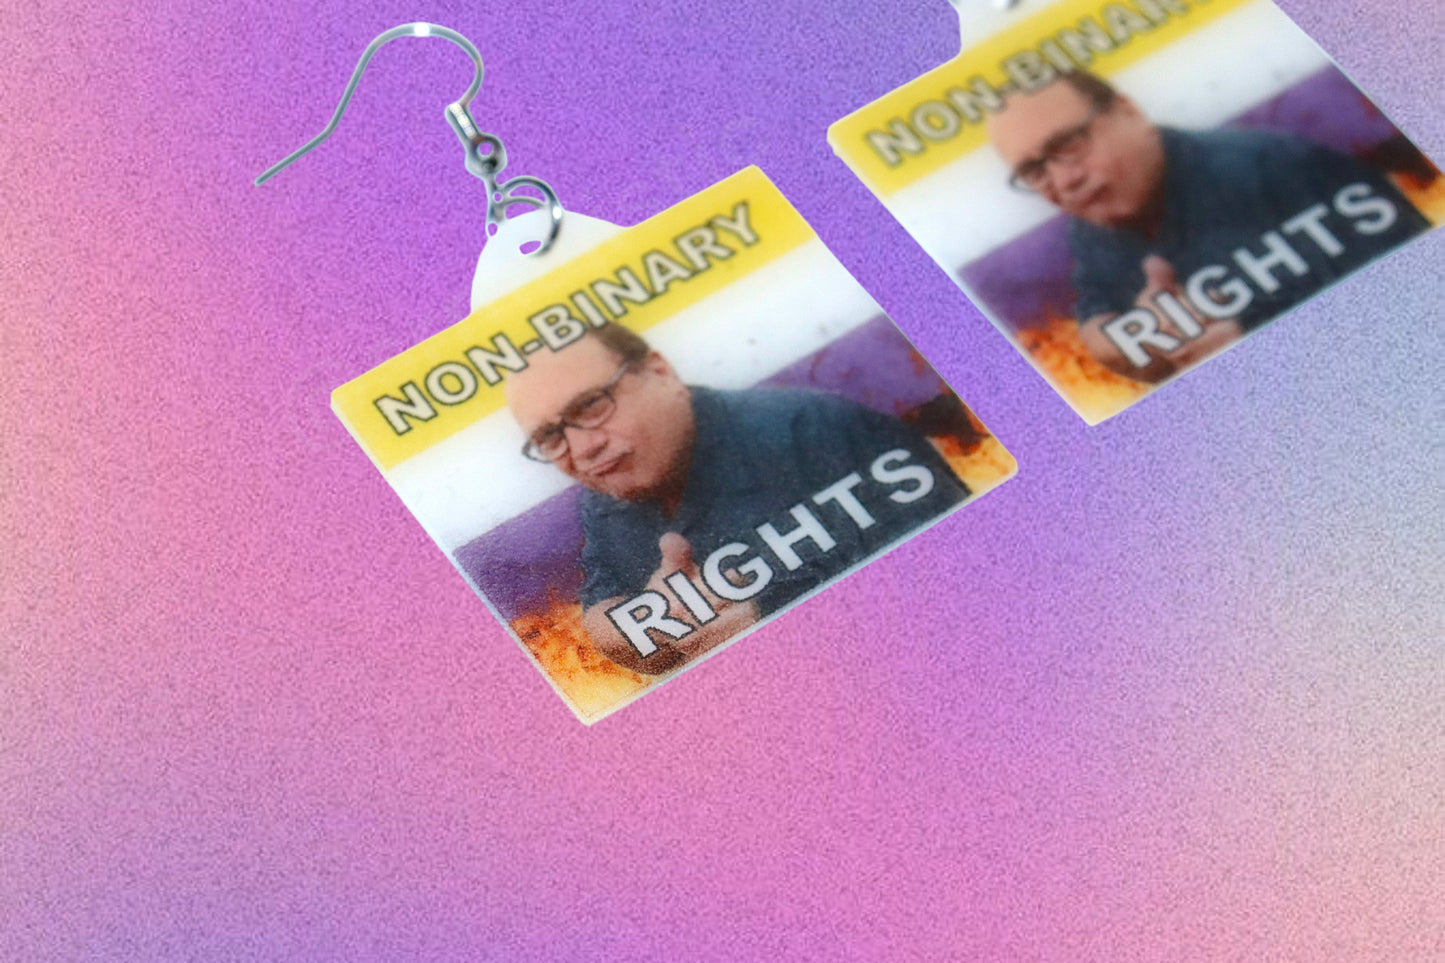 Danny DeVito Collection of Flaming Pride Flags Handmade Earrings!